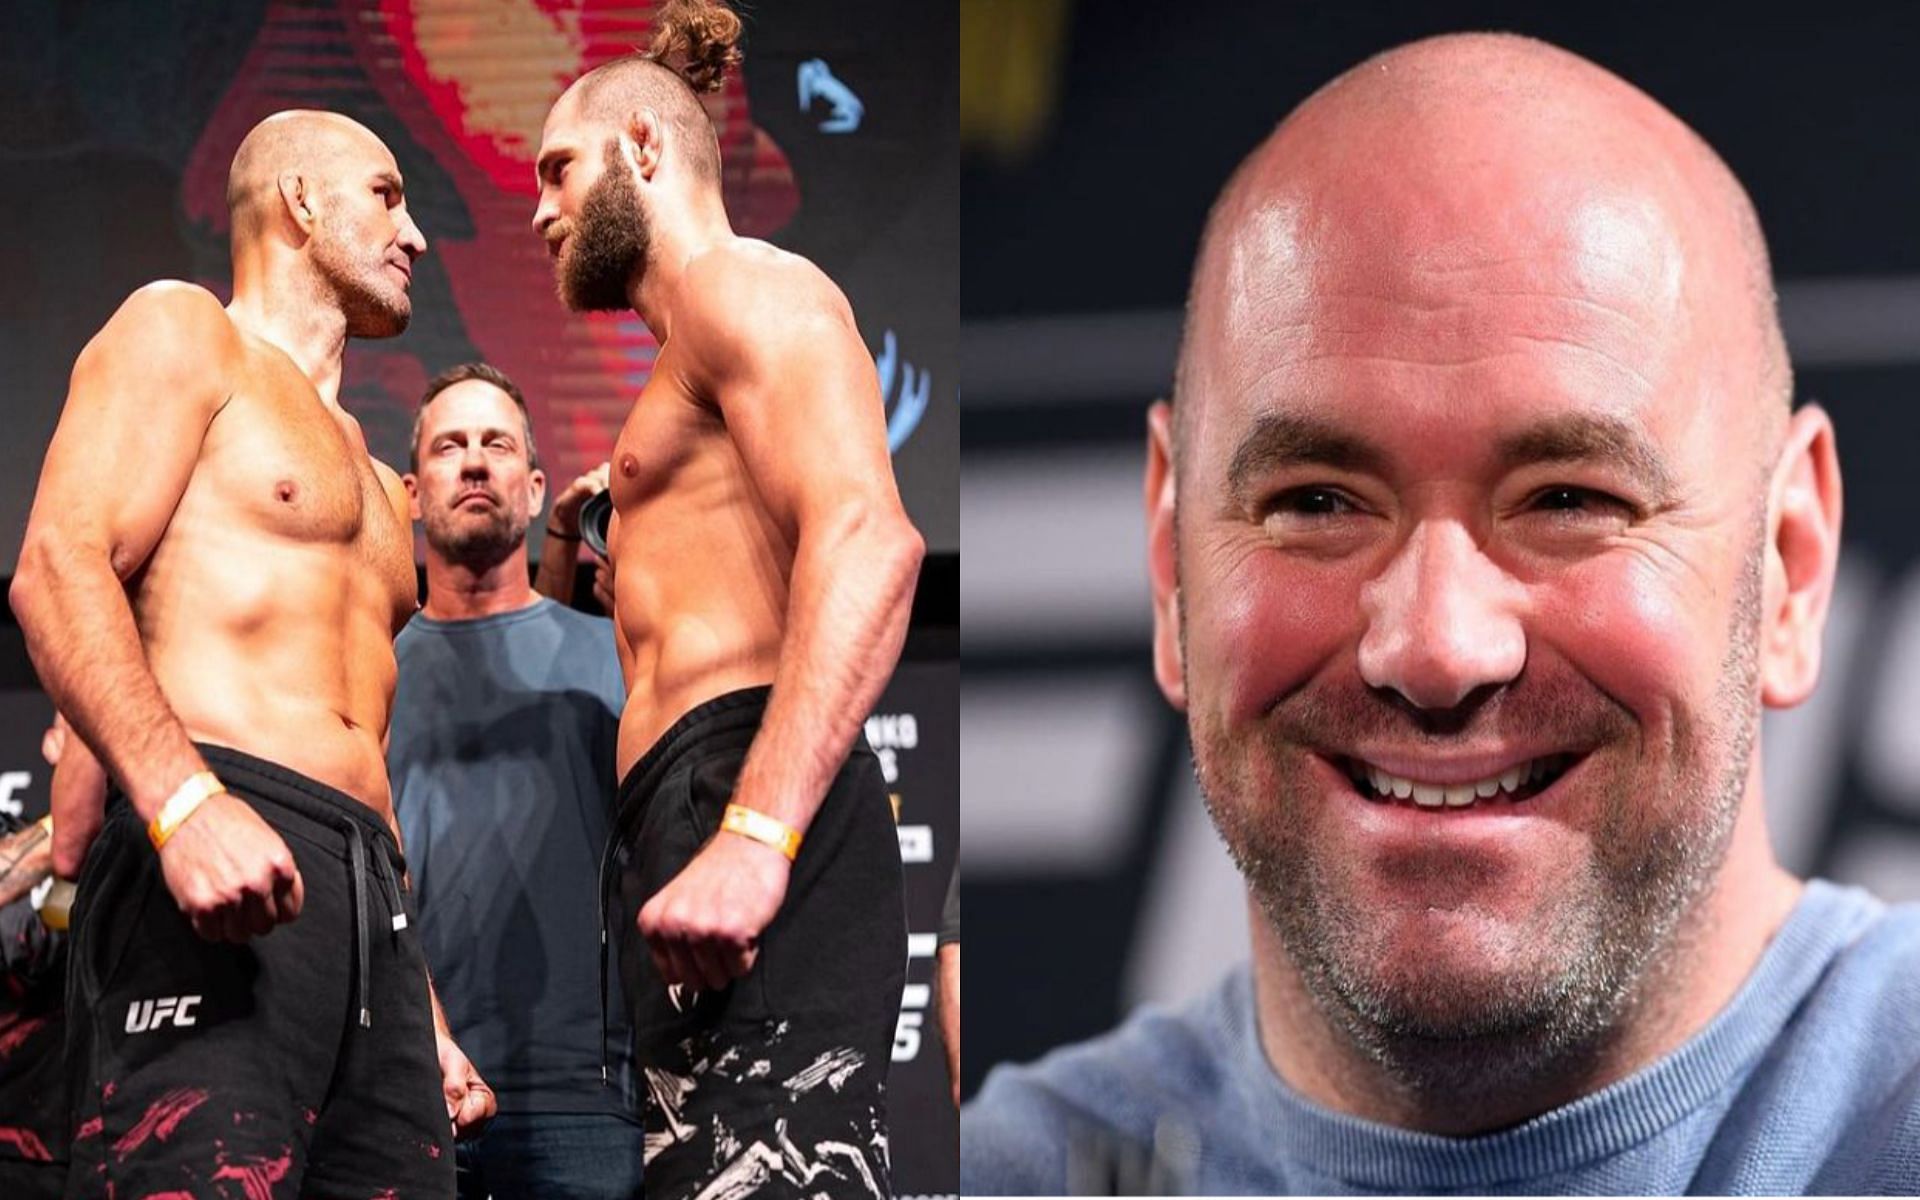 From left to right: Glover Teixeira, Jiri Prochazka, and Dana White [Images Courtesy: @ufc and @fightsportitaliaofficial on Instagram]